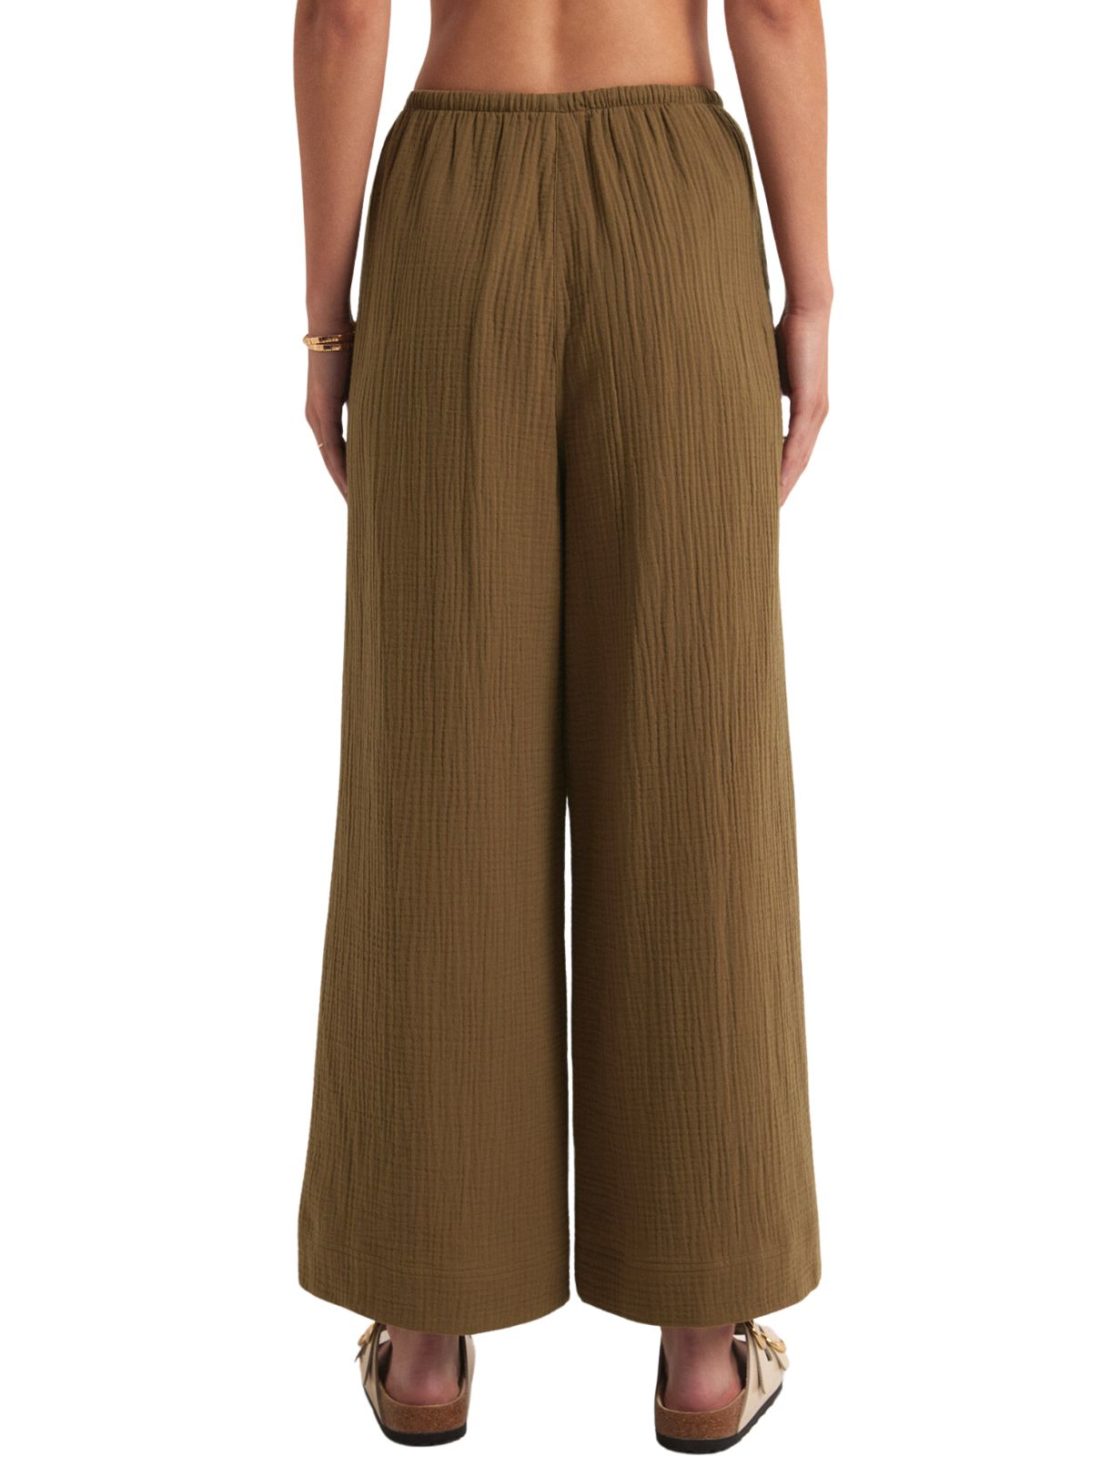 z supply barbados gauze pant in otter